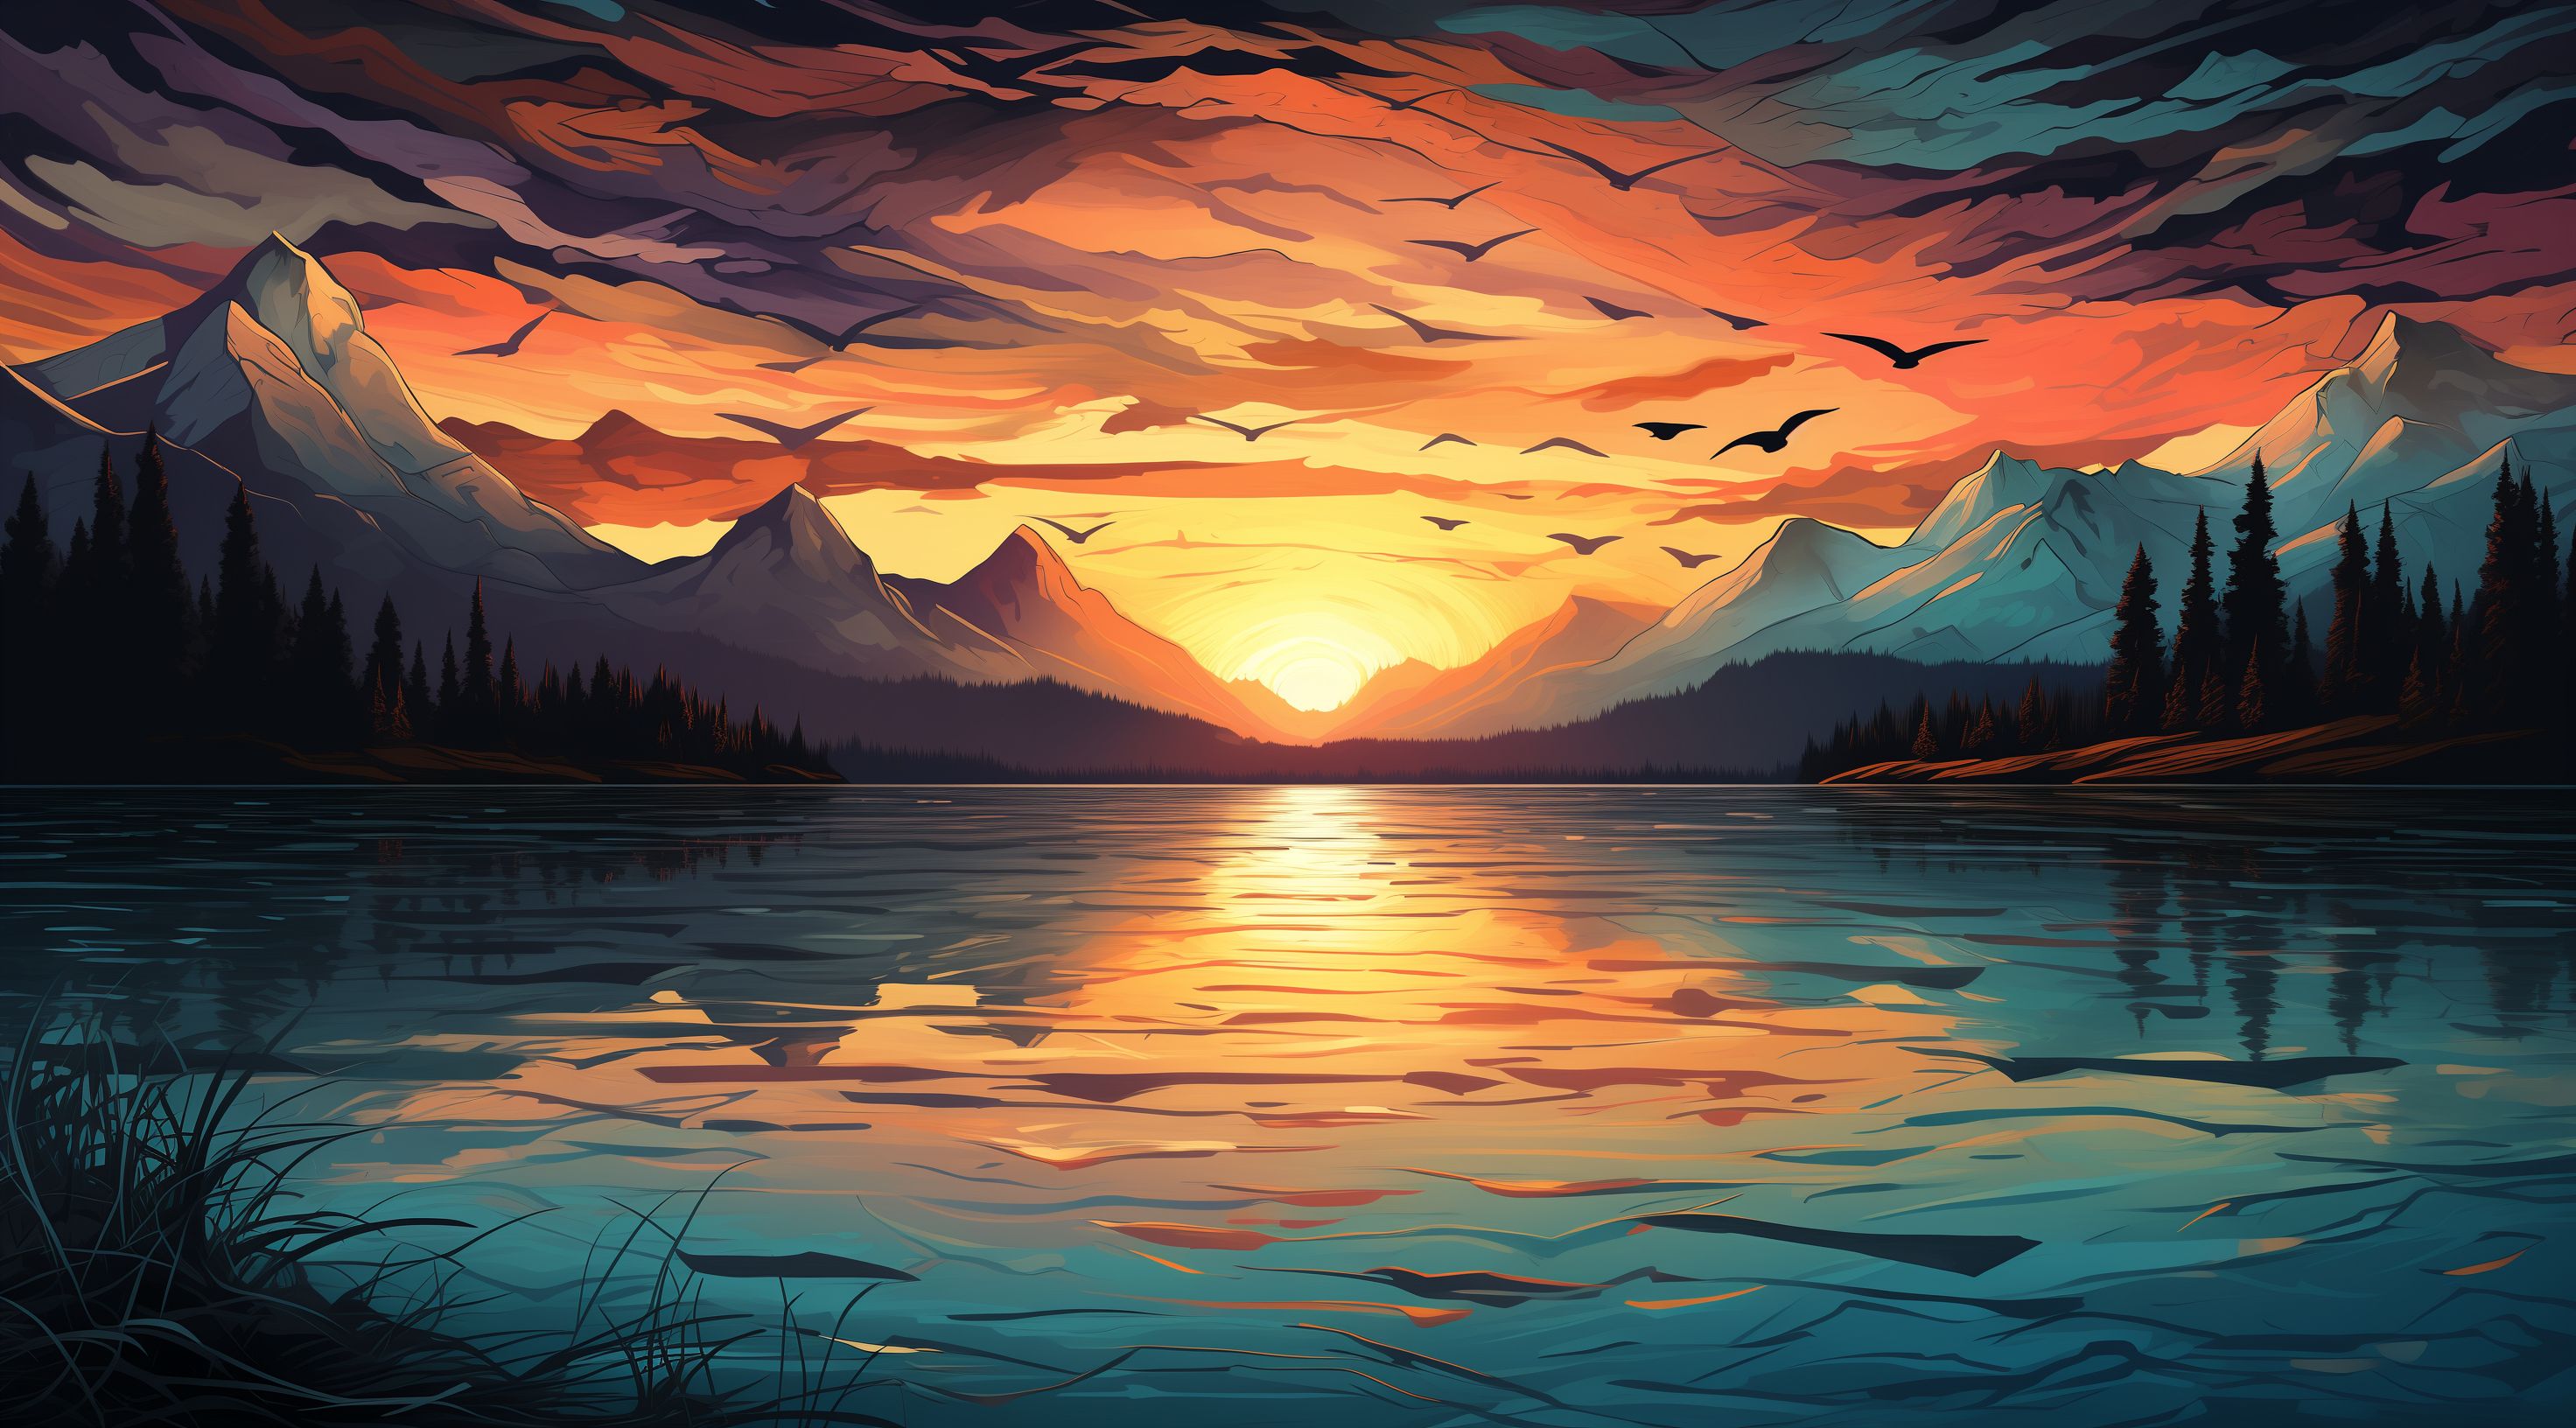 A digital painting of a sunset over a lake with mountains in the background - Lake